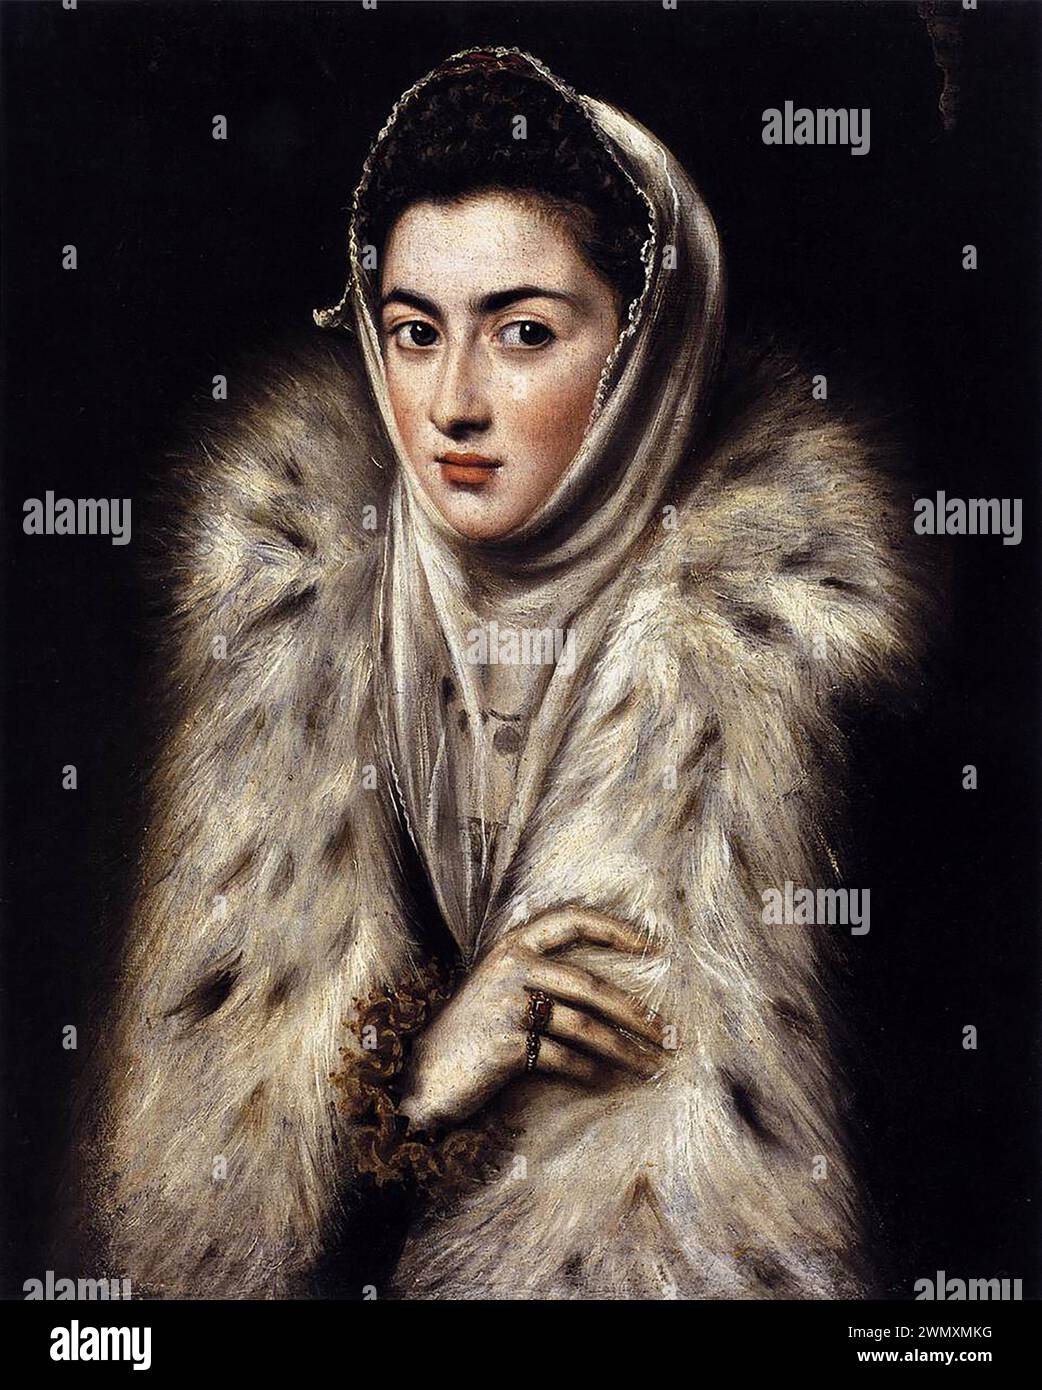 File:El Greco - A Lady in a Fur Wrap  Alonso Sánchez Coello between 1580 and 1588 Stock Photo